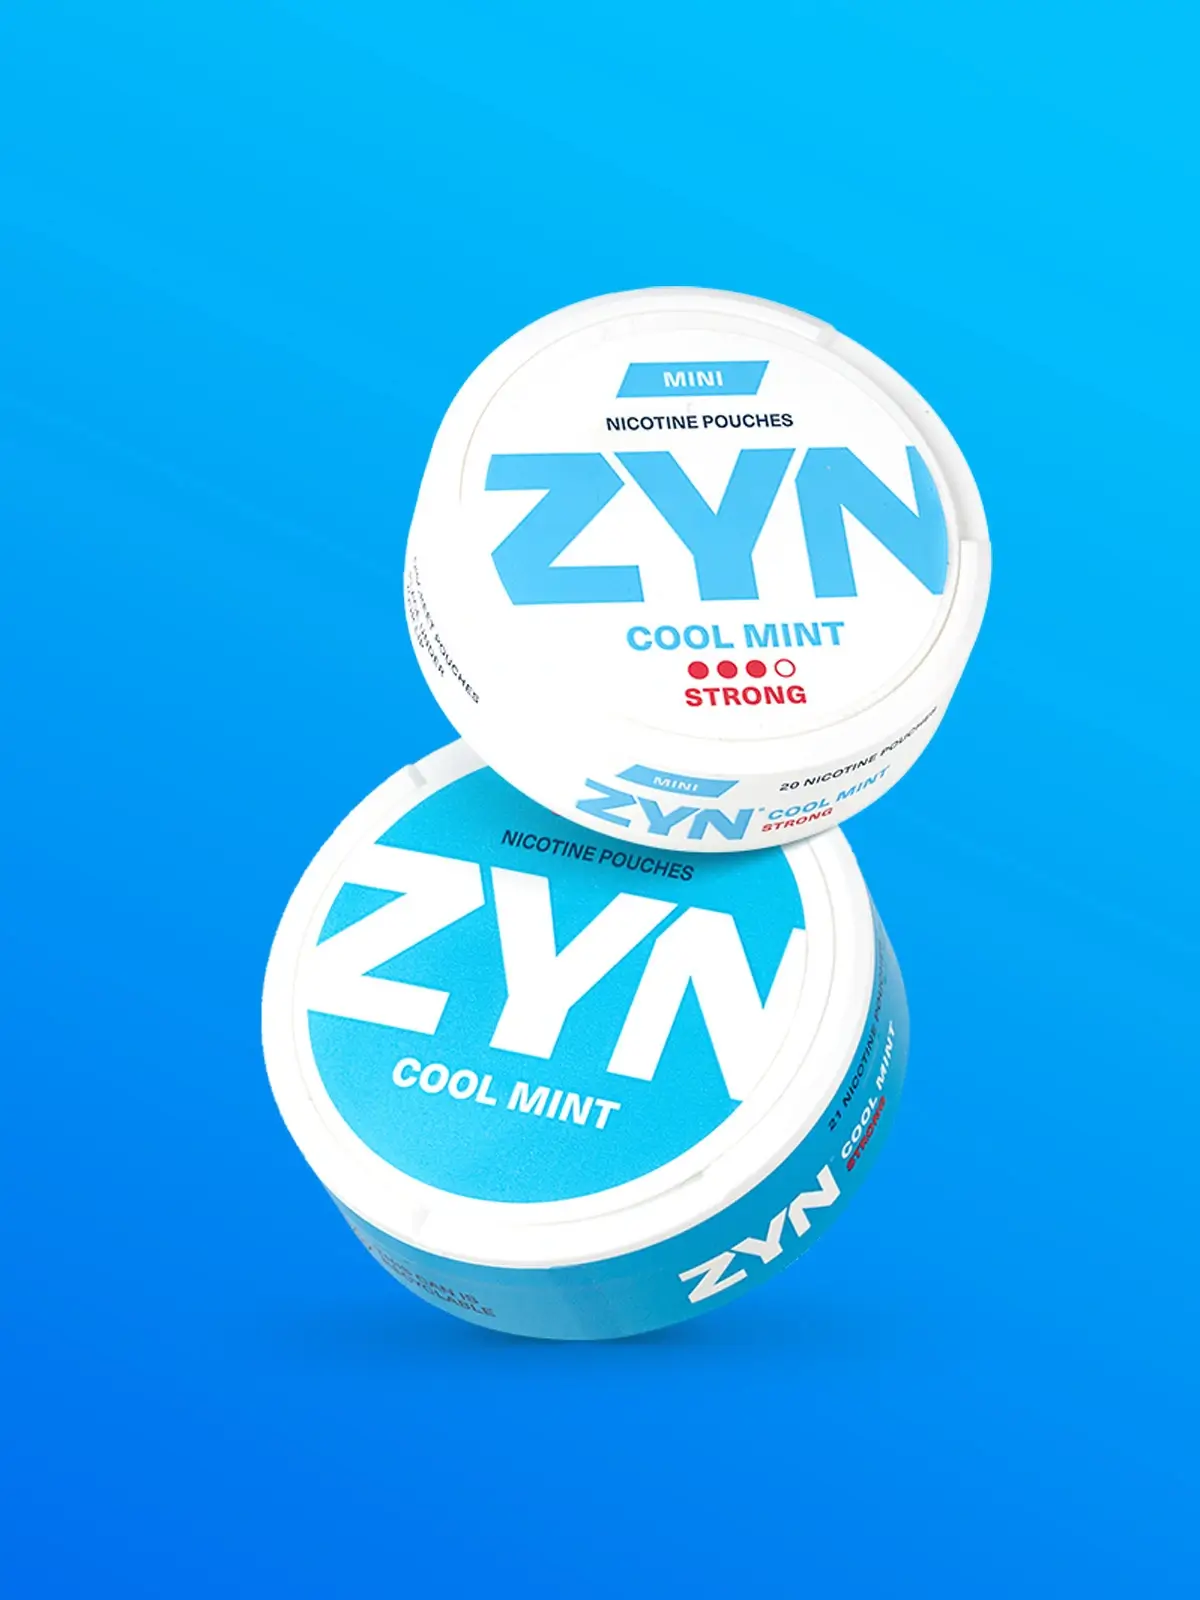 Two cans of ZYN nicotine pouches in Cool Mint with one being the Mini variety, in front of a blue background